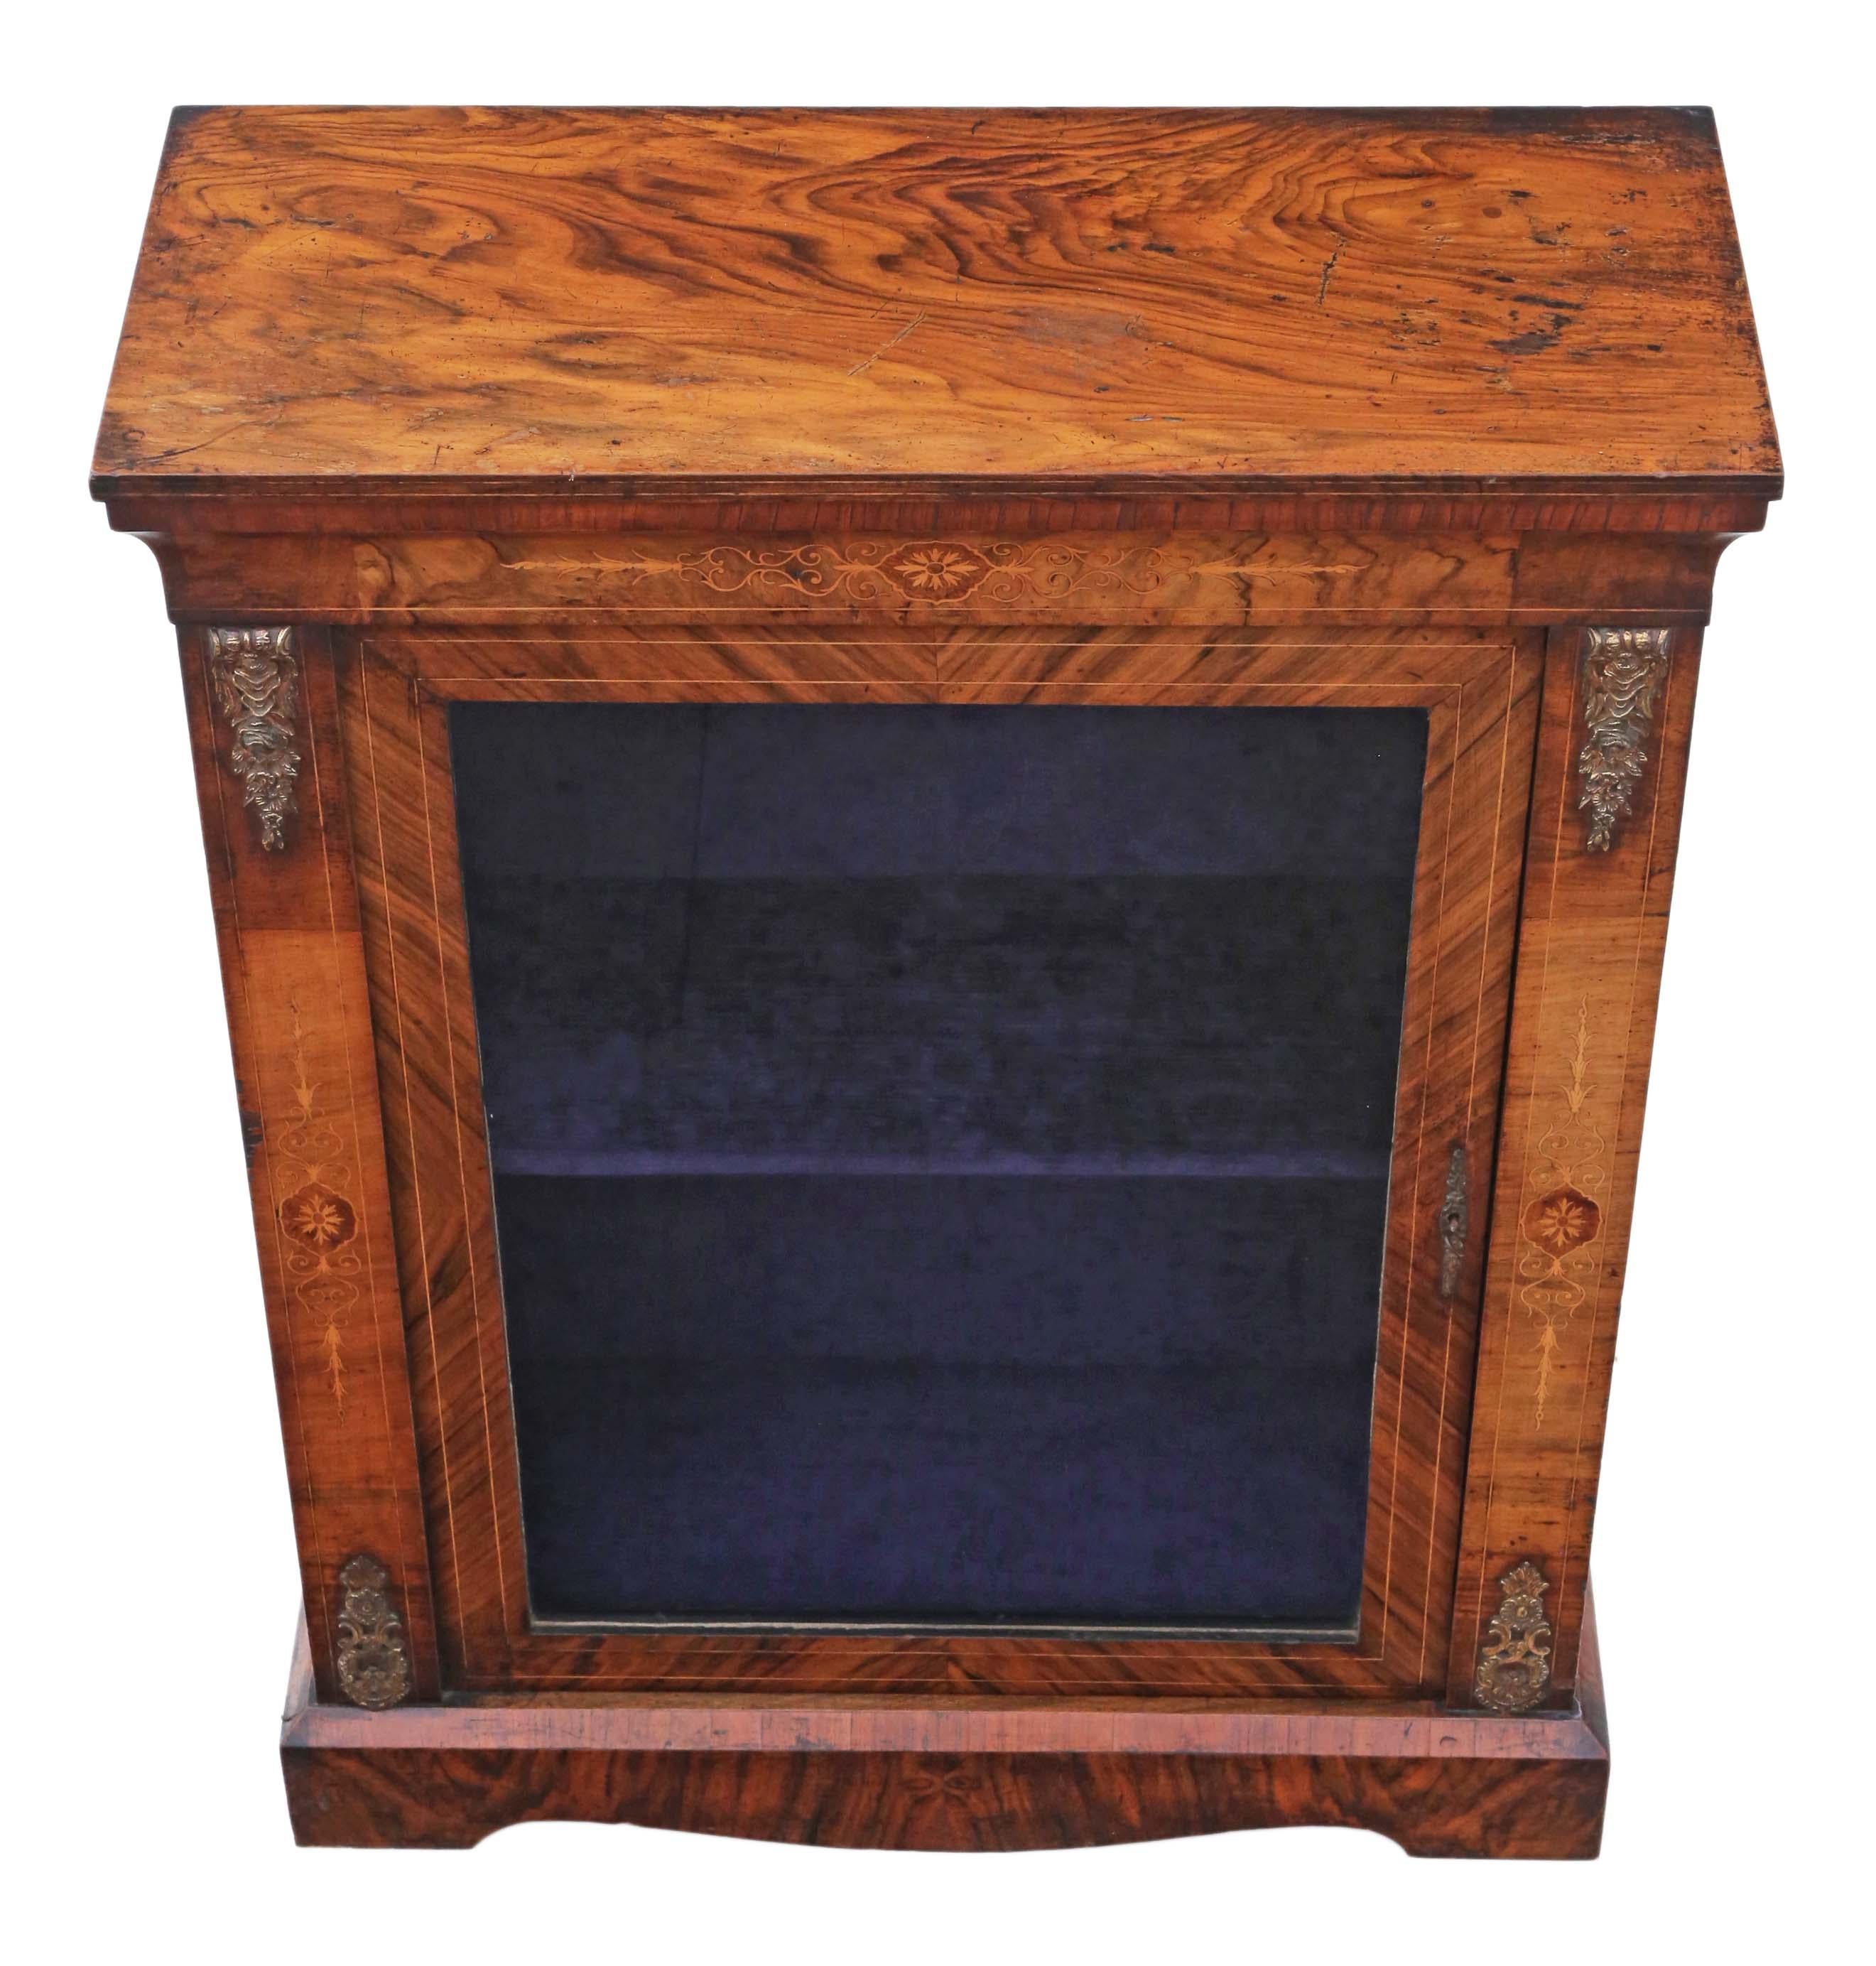 Inlaid burr walnut pier display cabinet, circa 1880. The best color and patina.
Solid and strong with no loose joints. We have a key.
Would look great in the right location! No woodworm. New blue velour lining.
Overall maximum dimensions: 77 cm